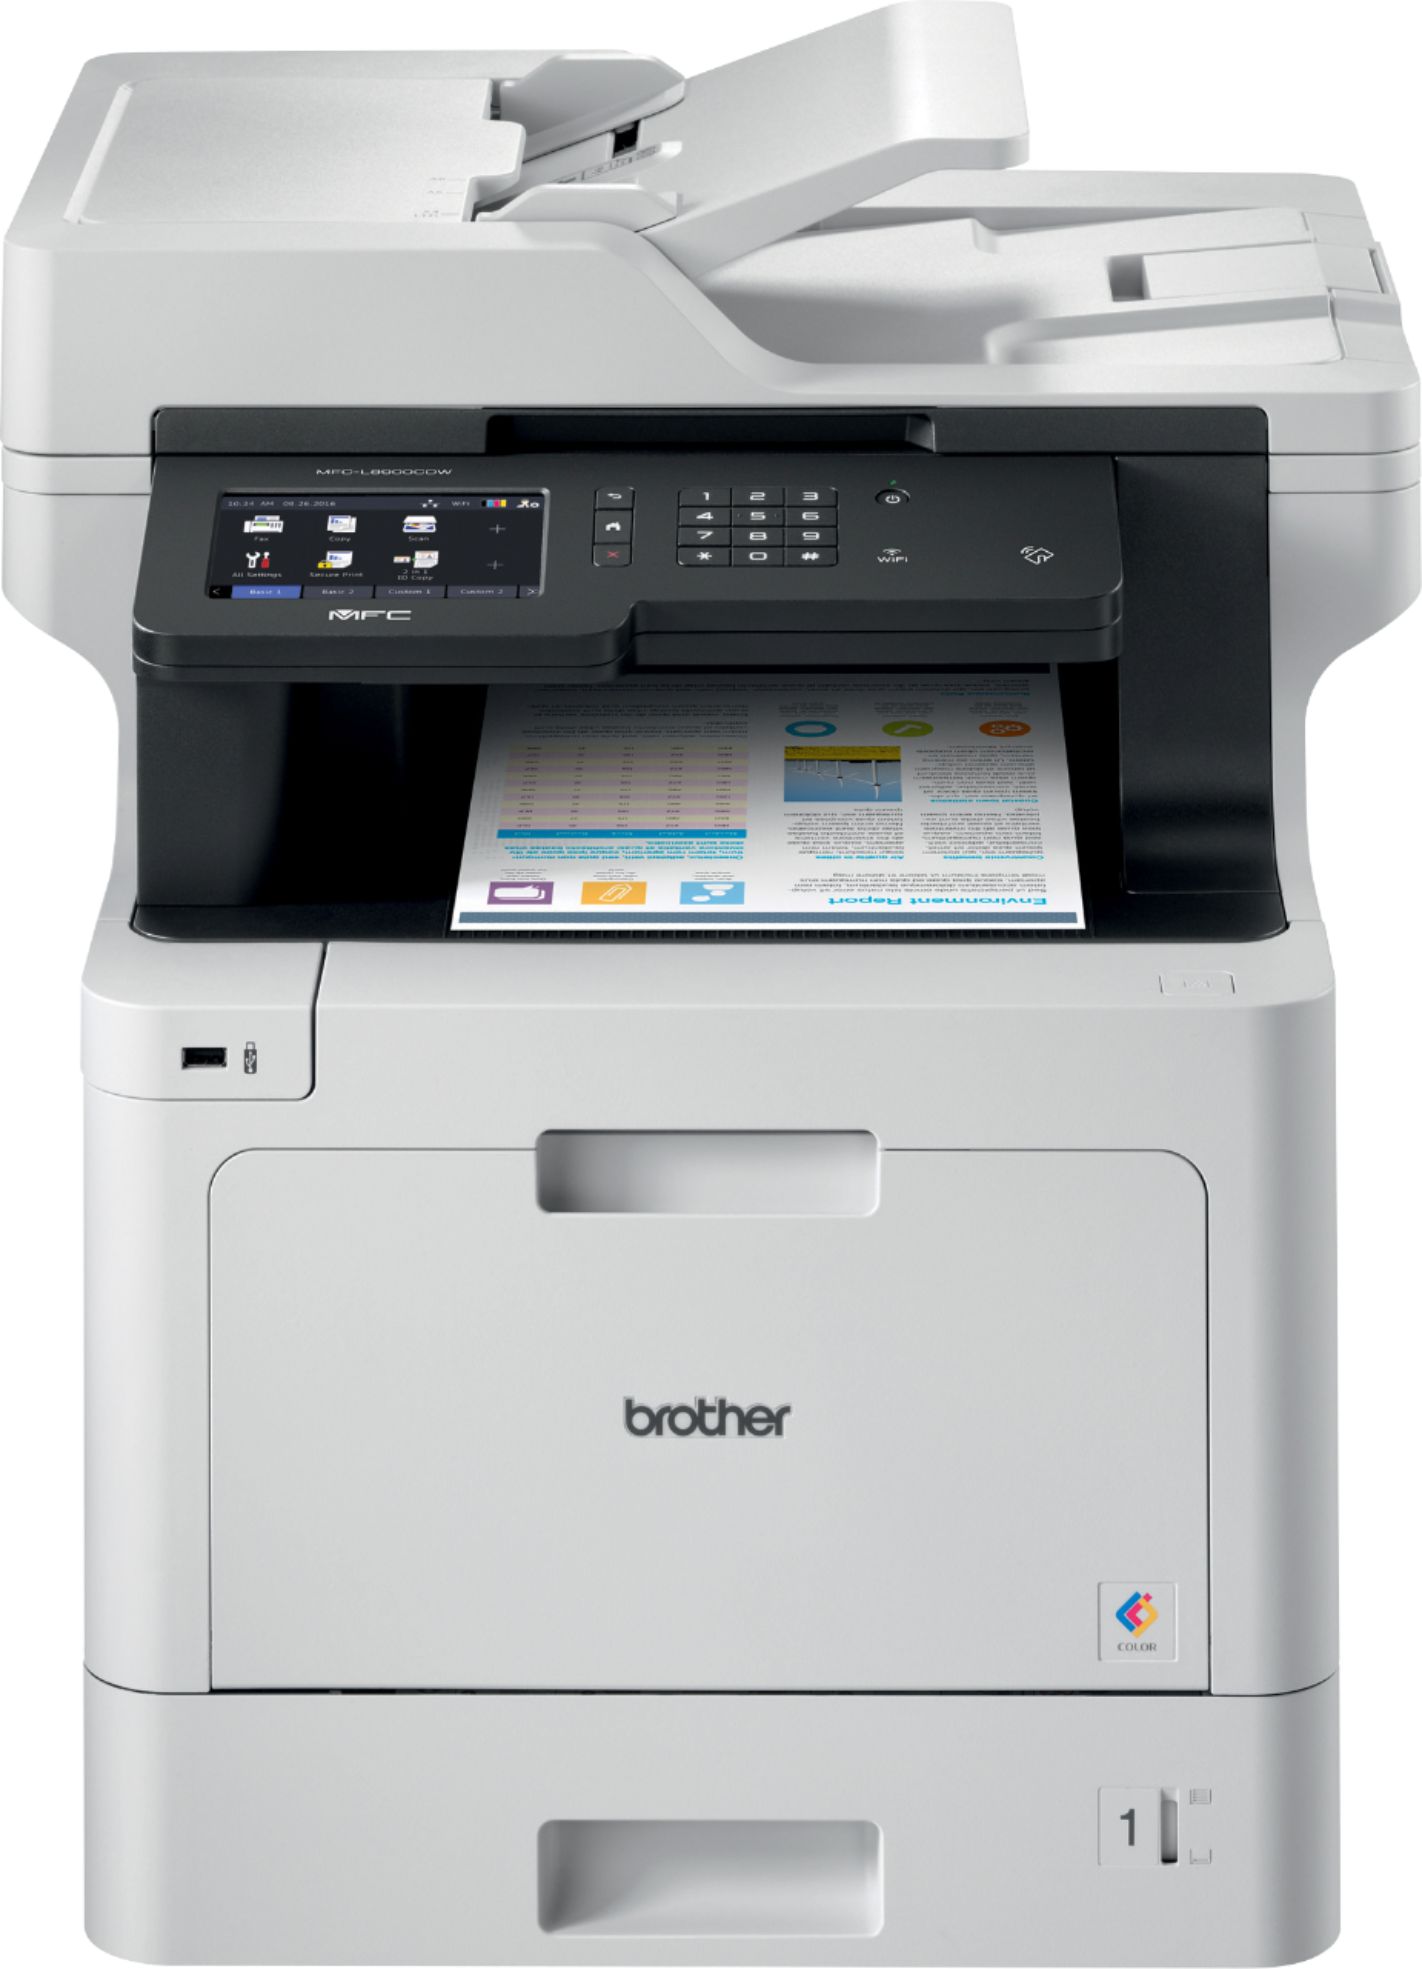 Brother MFC-L8900CDW Wireless Color All-in-One Laser Printer White